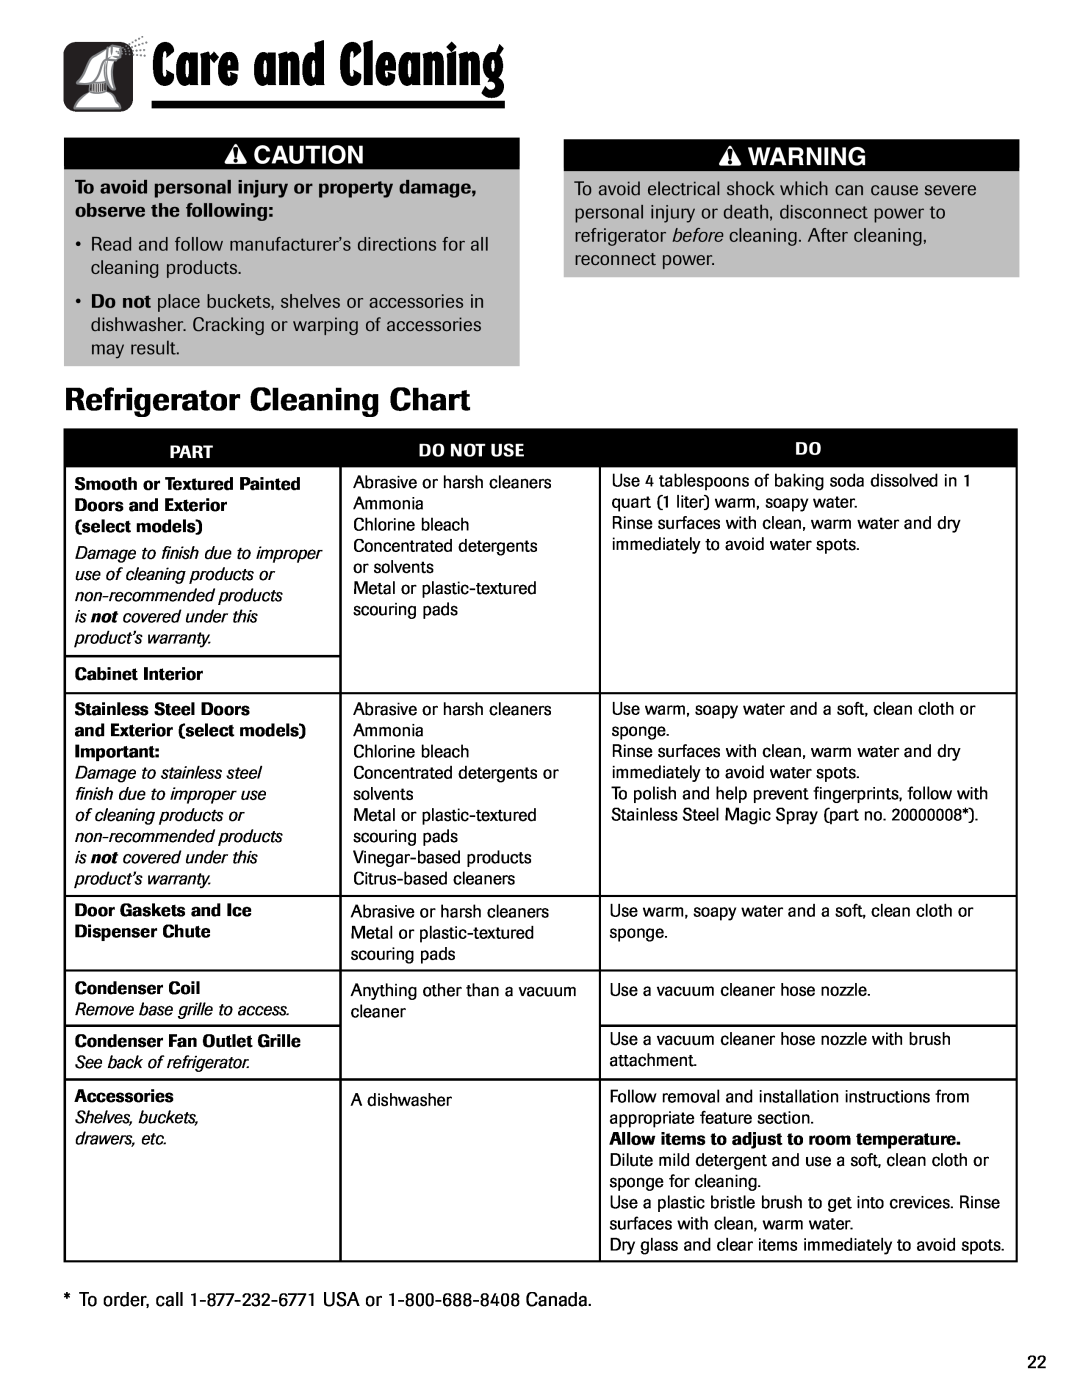 Maytag MFI2266AEW important safety instructions Care and Cleaning, Refrigerator Cleaning Chart, Part, Do Not Use 